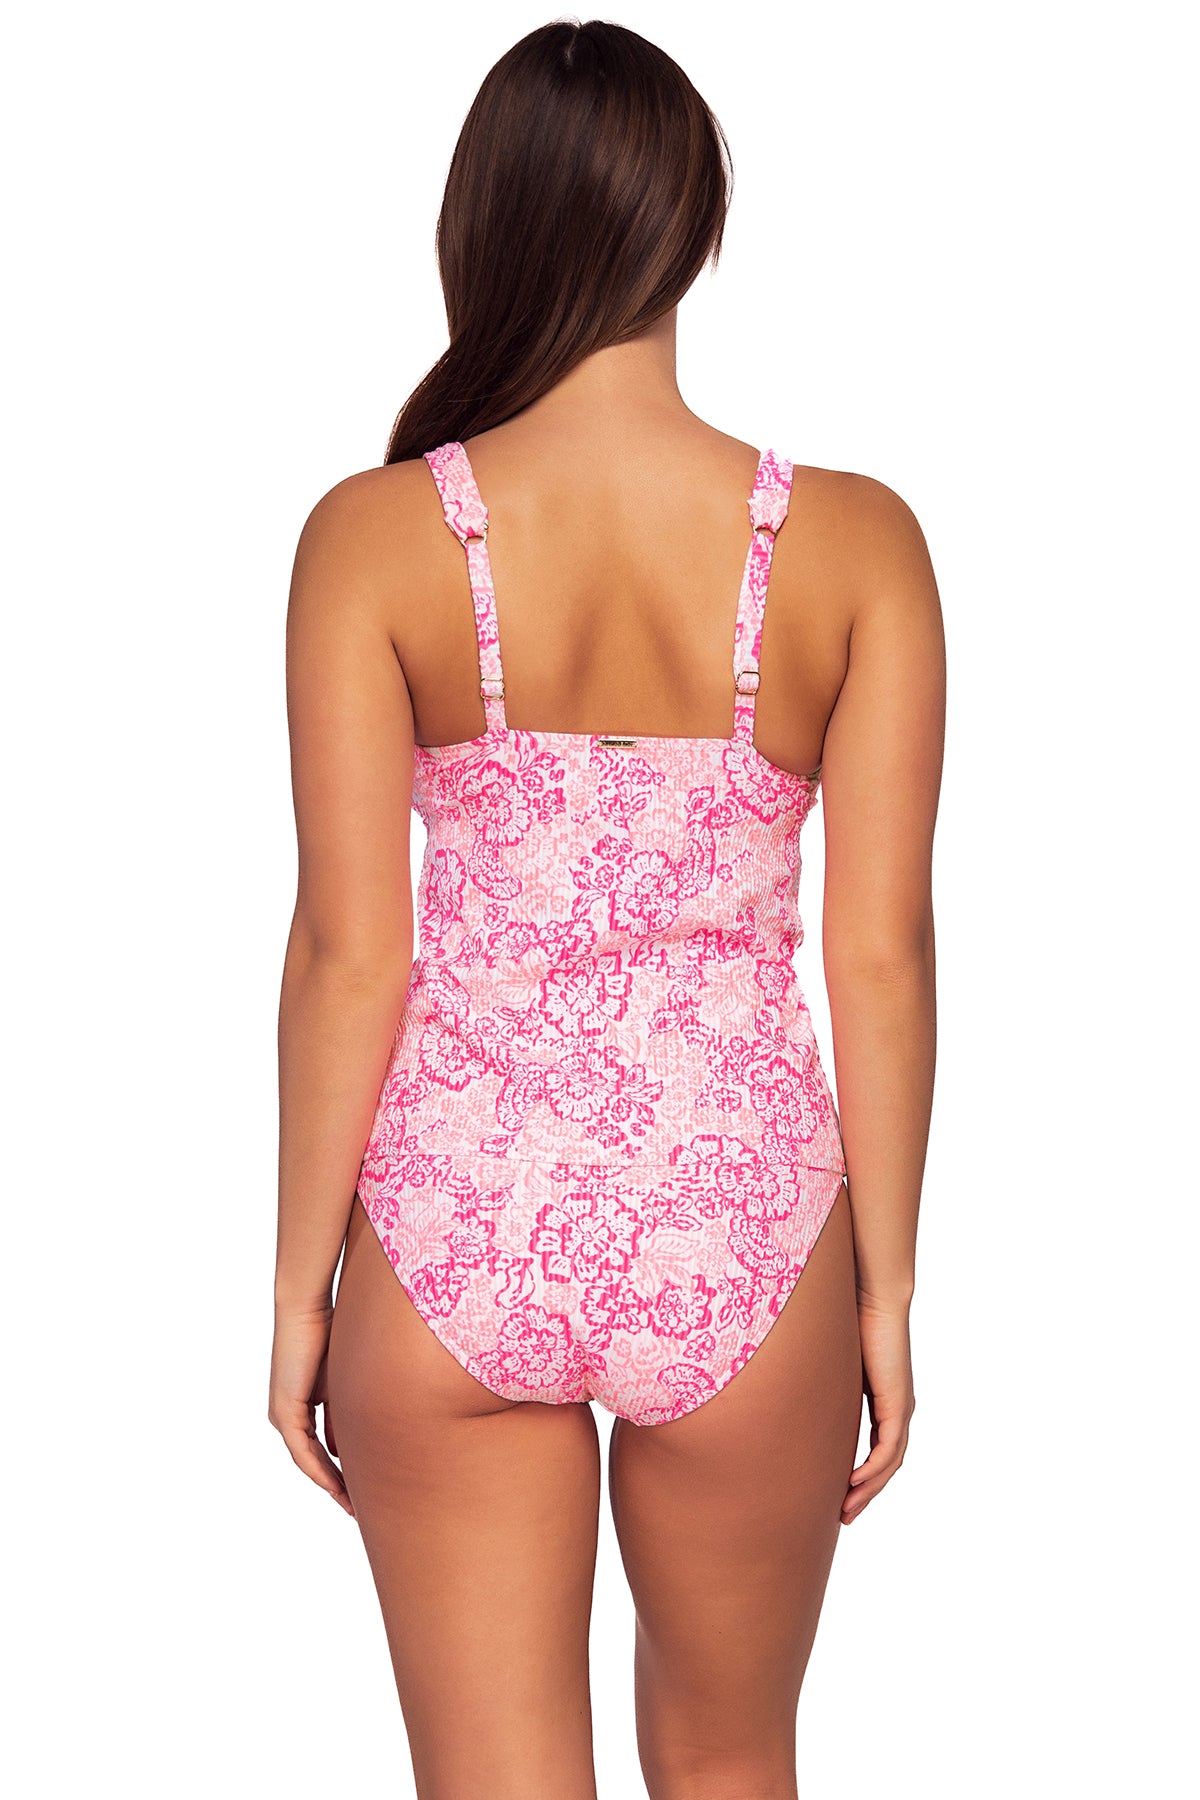 Back view of Sunsets Coral Cove Elsie Tankini Top